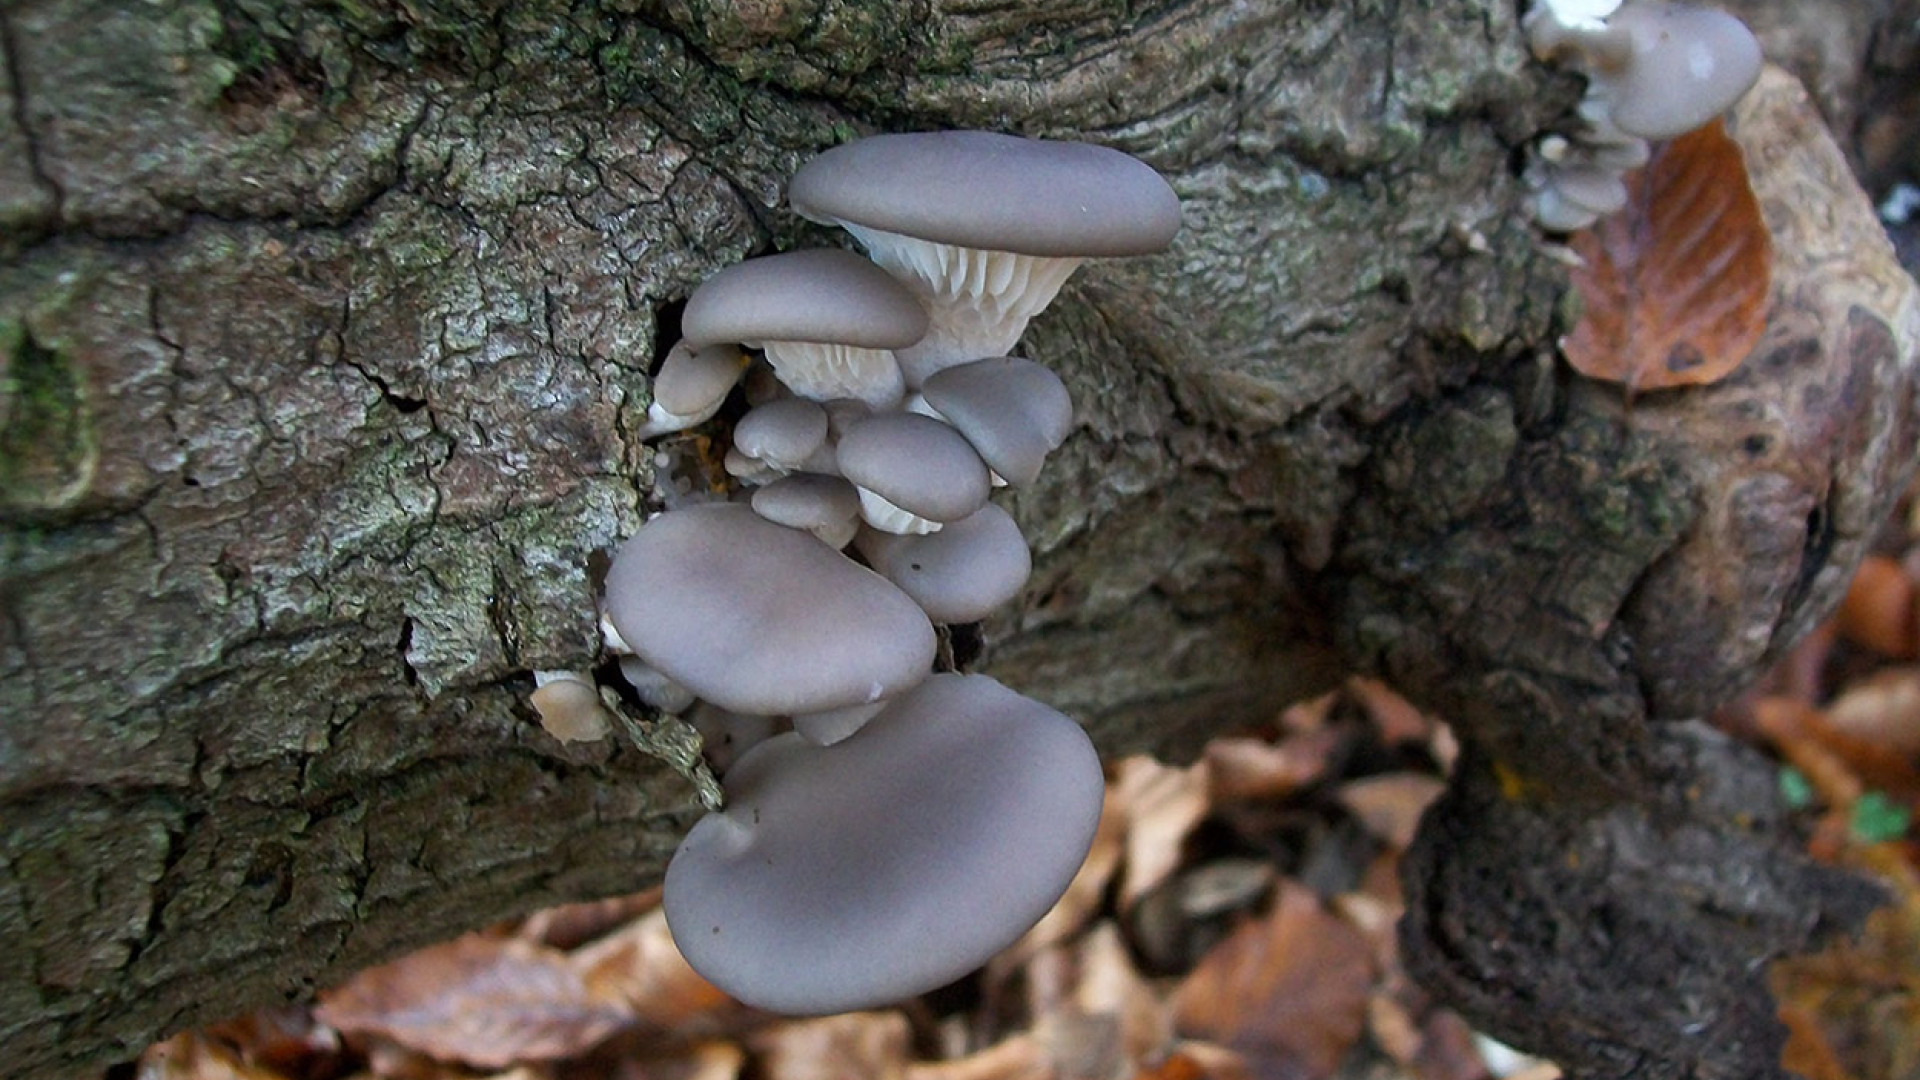 Blue oyster mushrooms growing at home on wood log